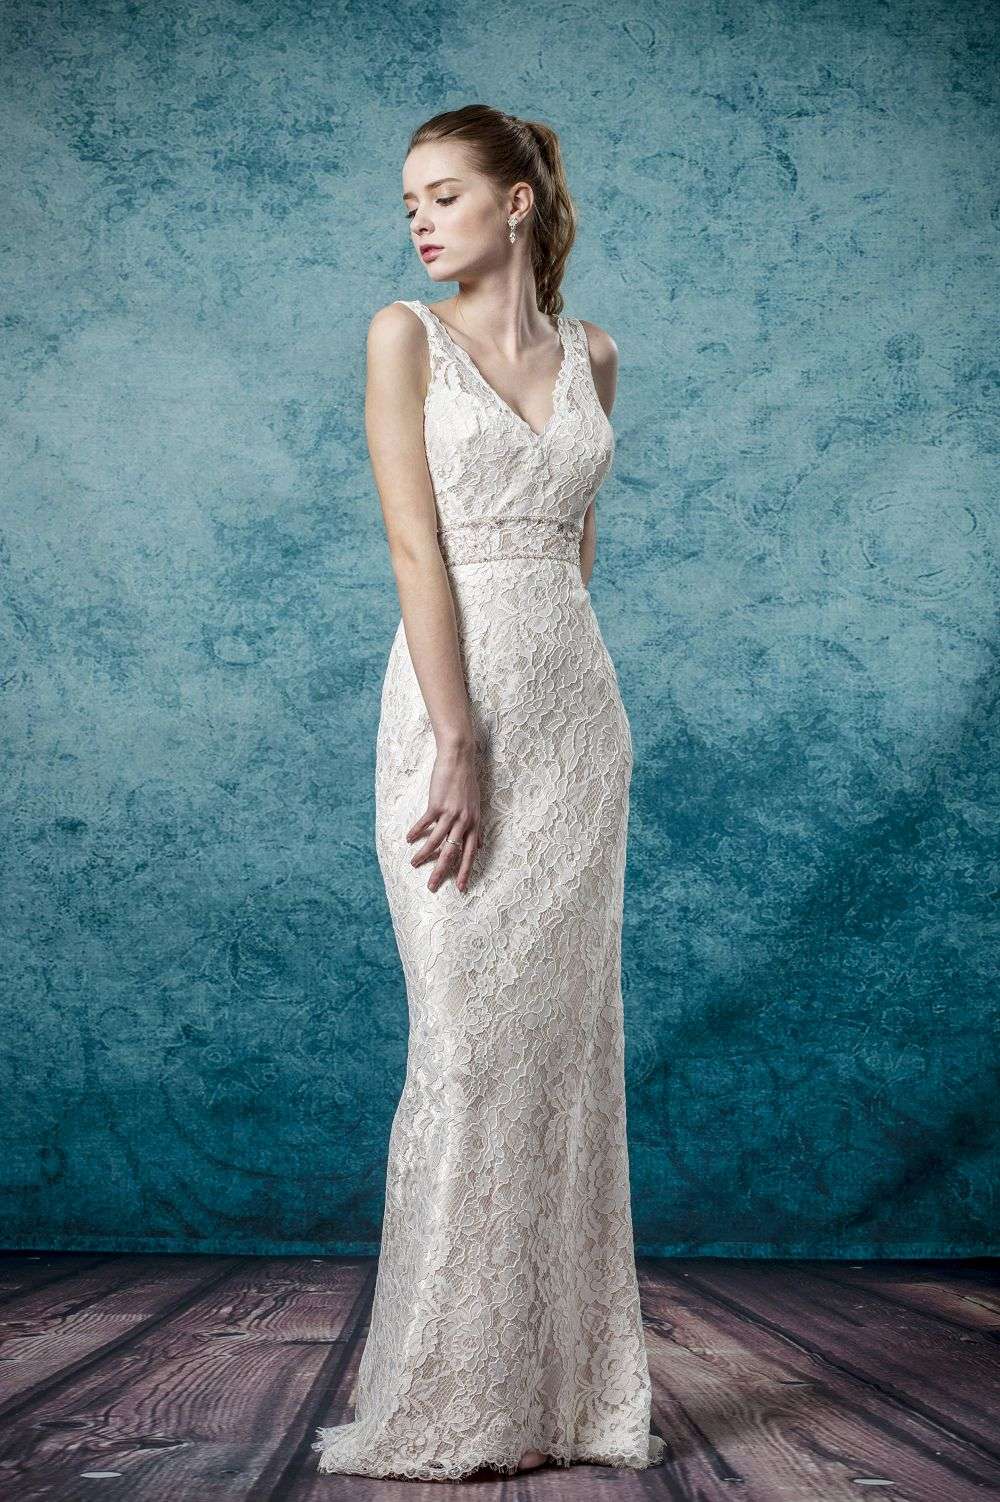 Win a Made-to-Measure Wedding Dress from Leis Atelier! (4)